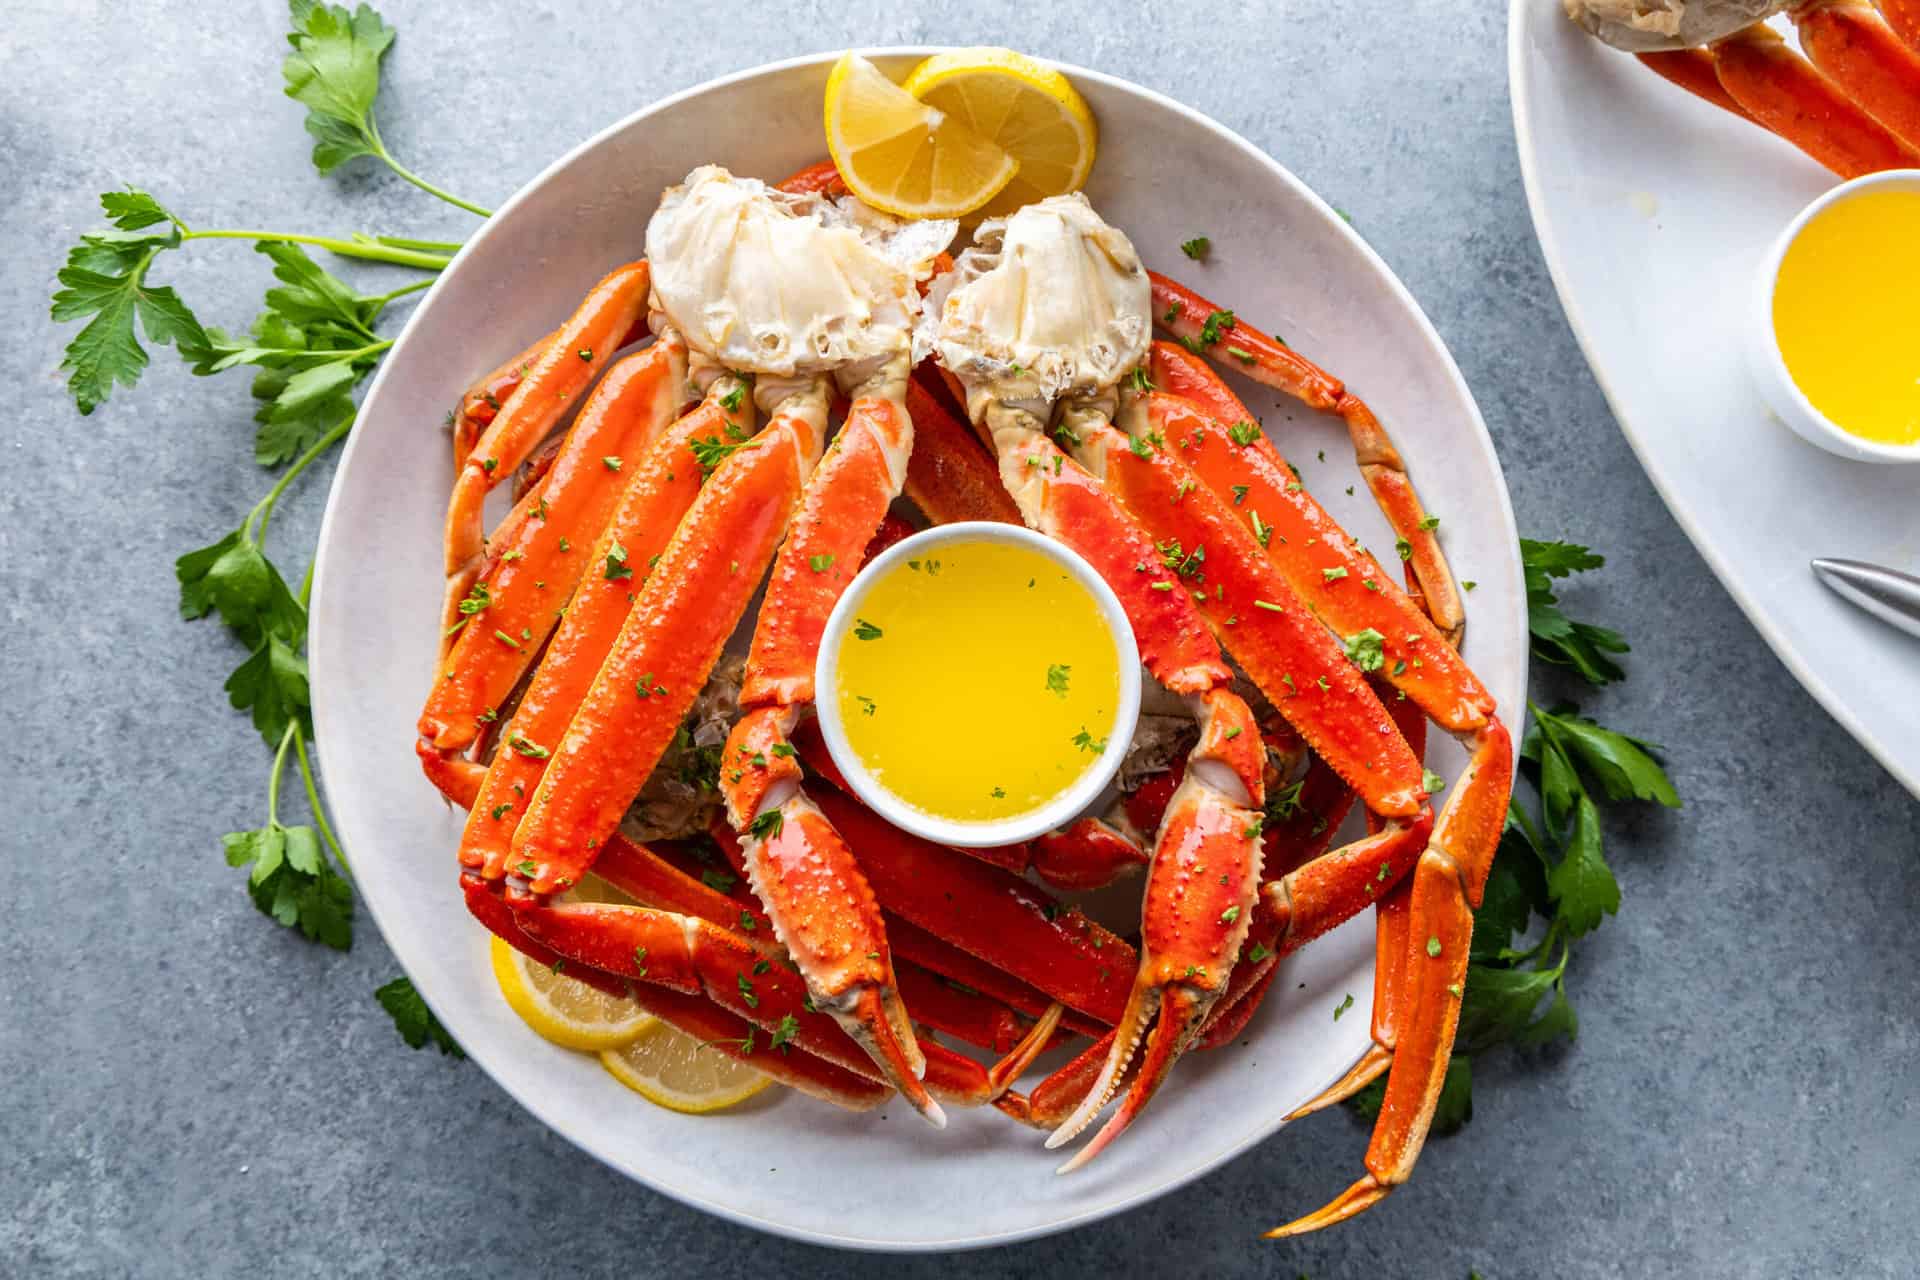 Snow Crab Legs - 1 Pound Nutrition Facts - Eat This Much